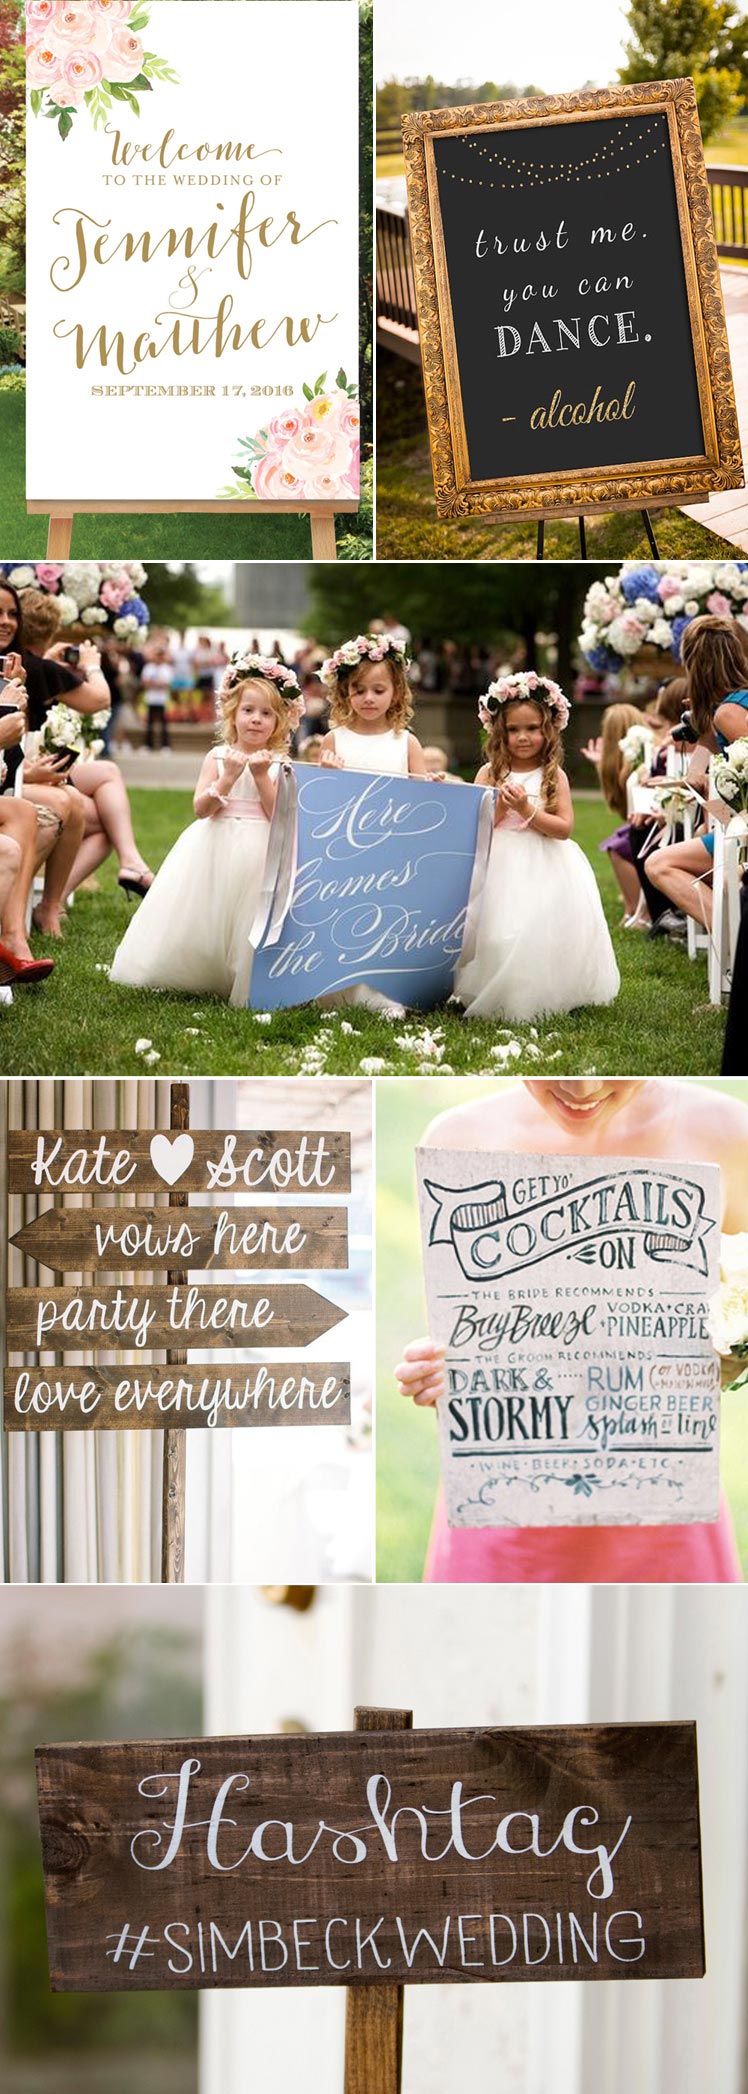 Wedding sign ideas for your special day